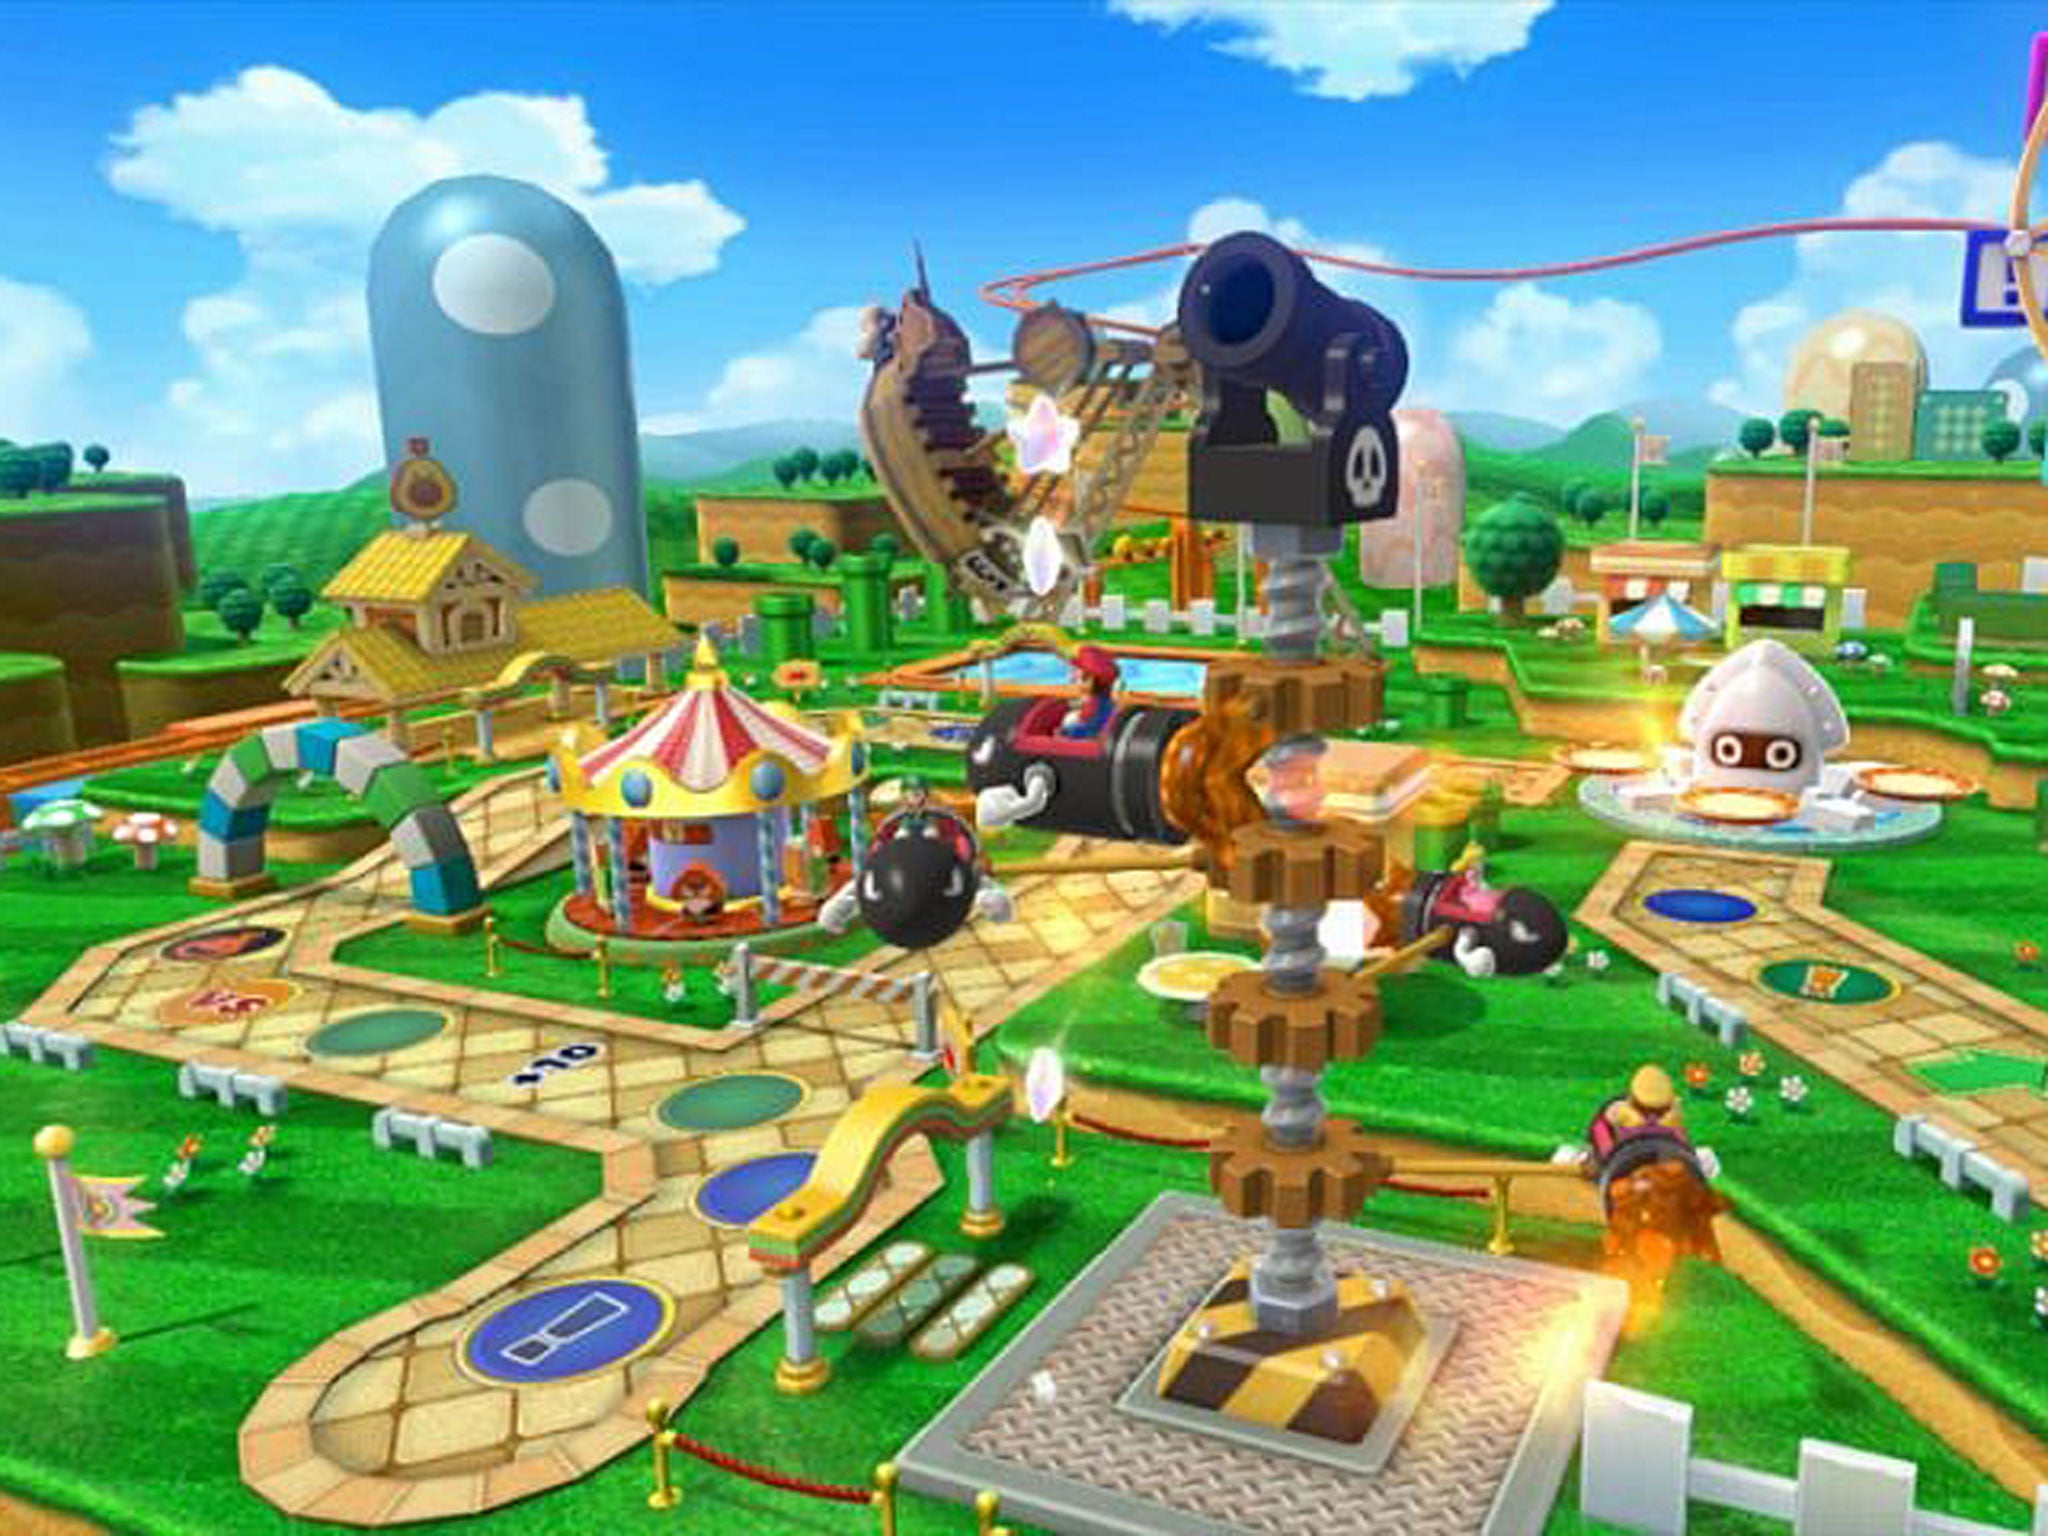 While the aesthetics of Mario Party 10 are great, you don't get to play enough of them